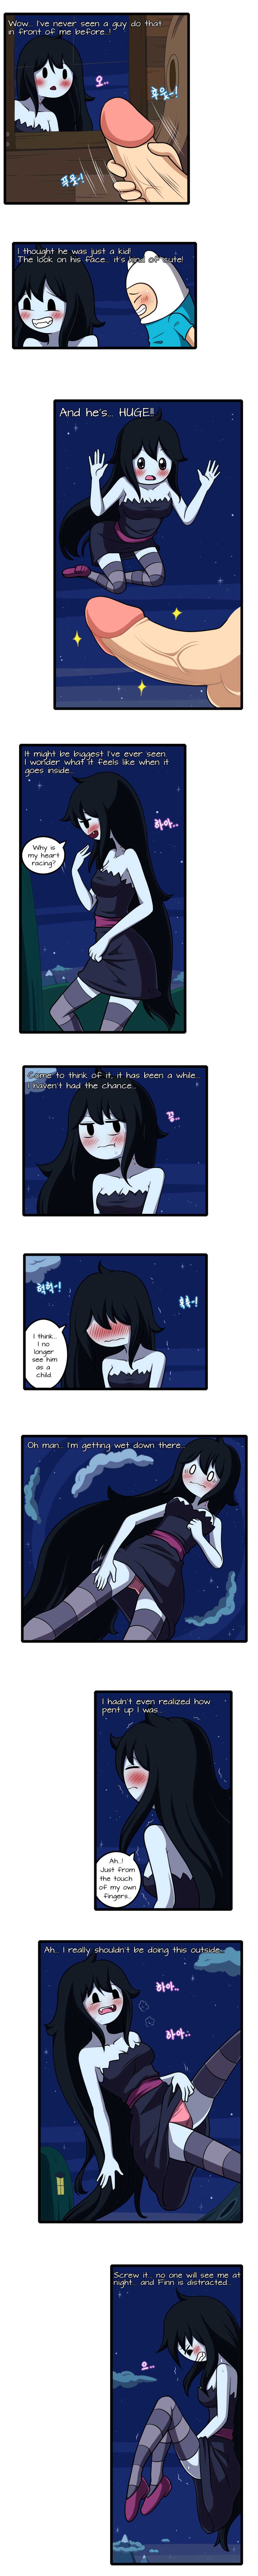 [WB] Adult Time 4 (Adventure Time) [English] - Page 4